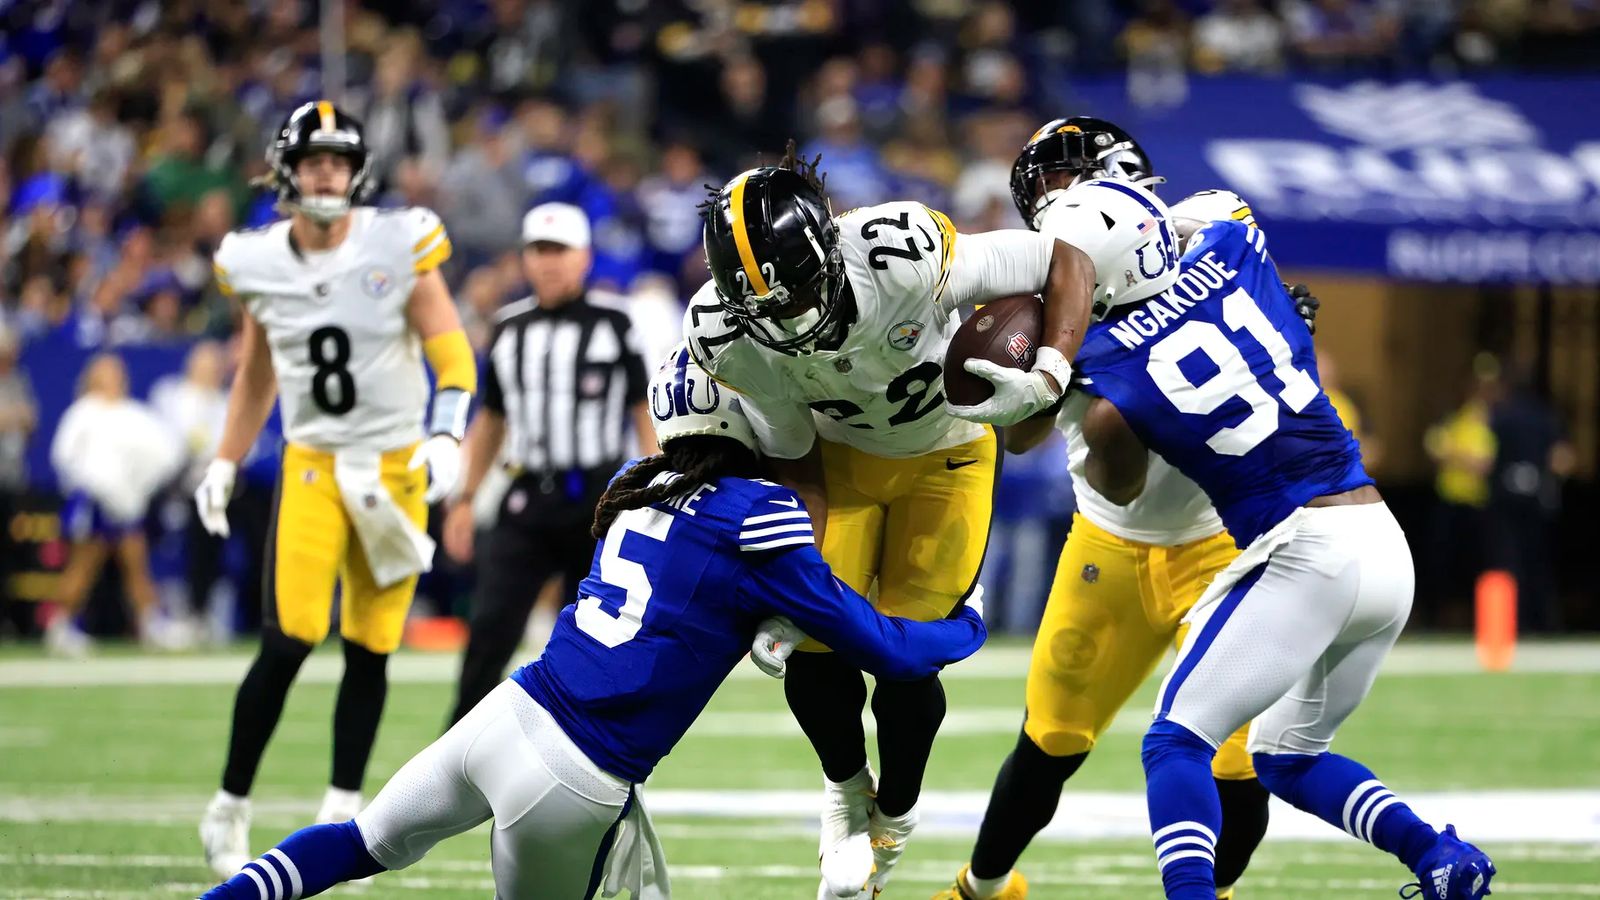 The weeks change. The opponents change. The Steelers' inability to